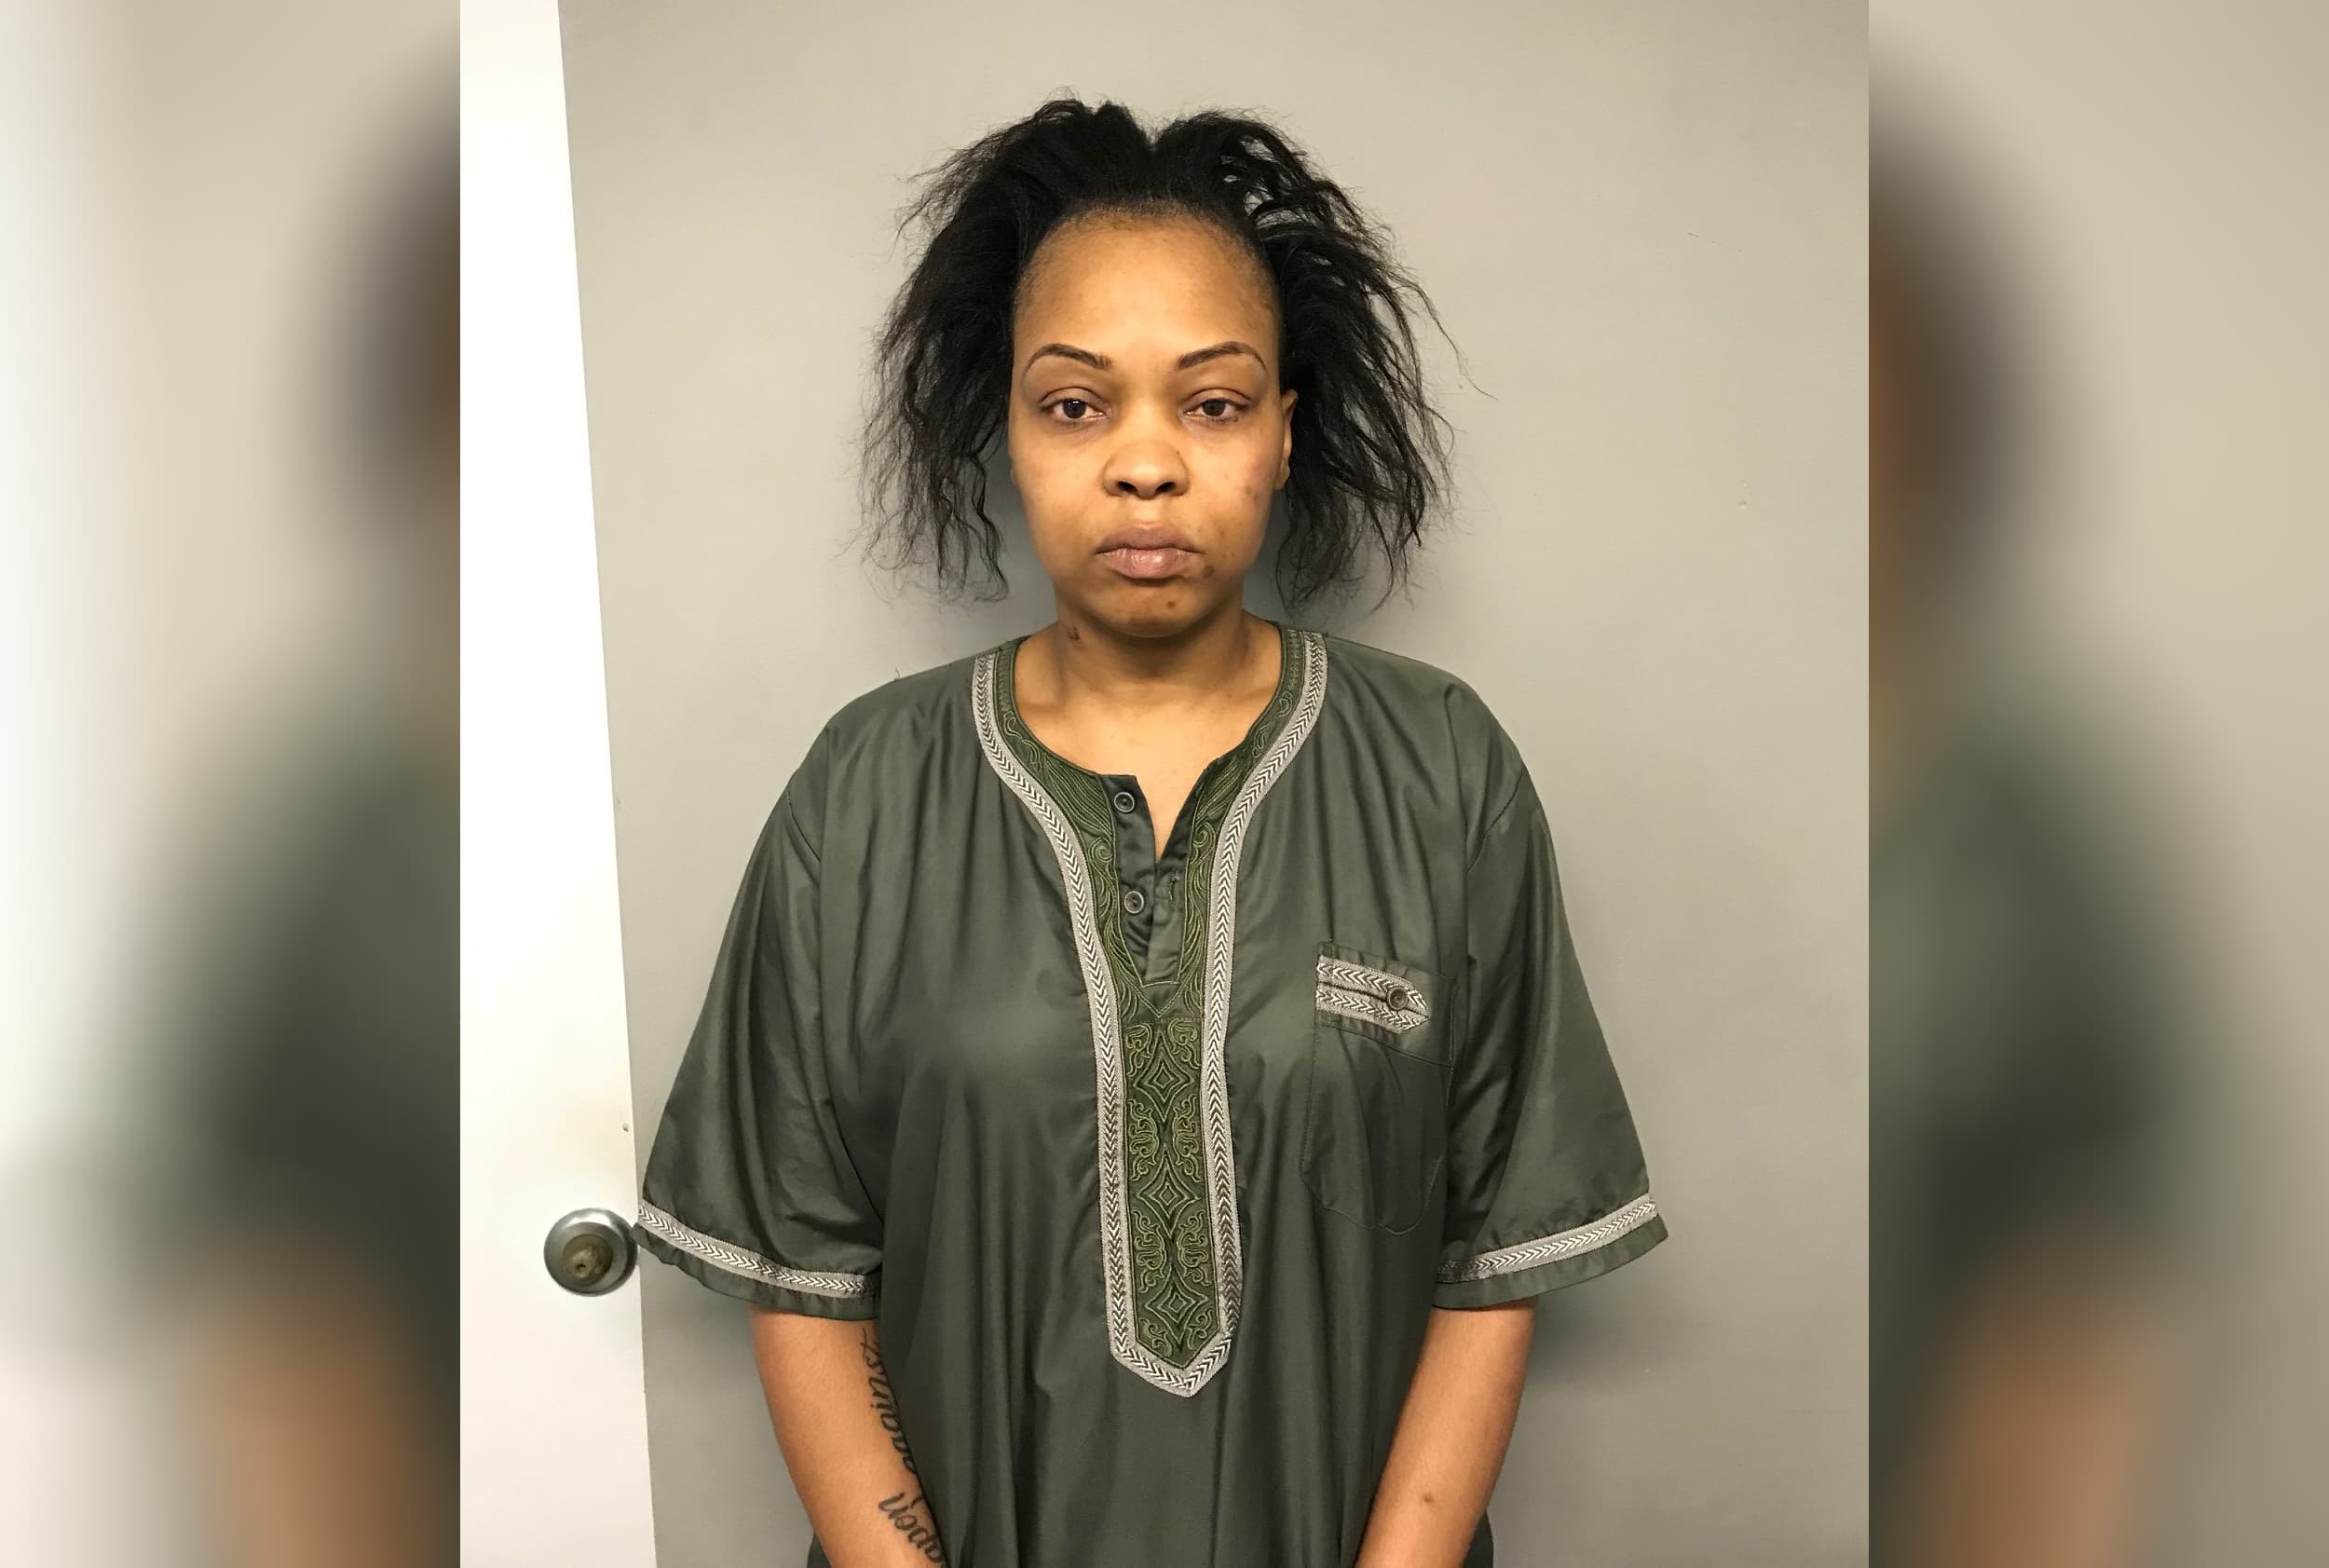 Woman charged with shooting man, prompting police standoff in Round Lake